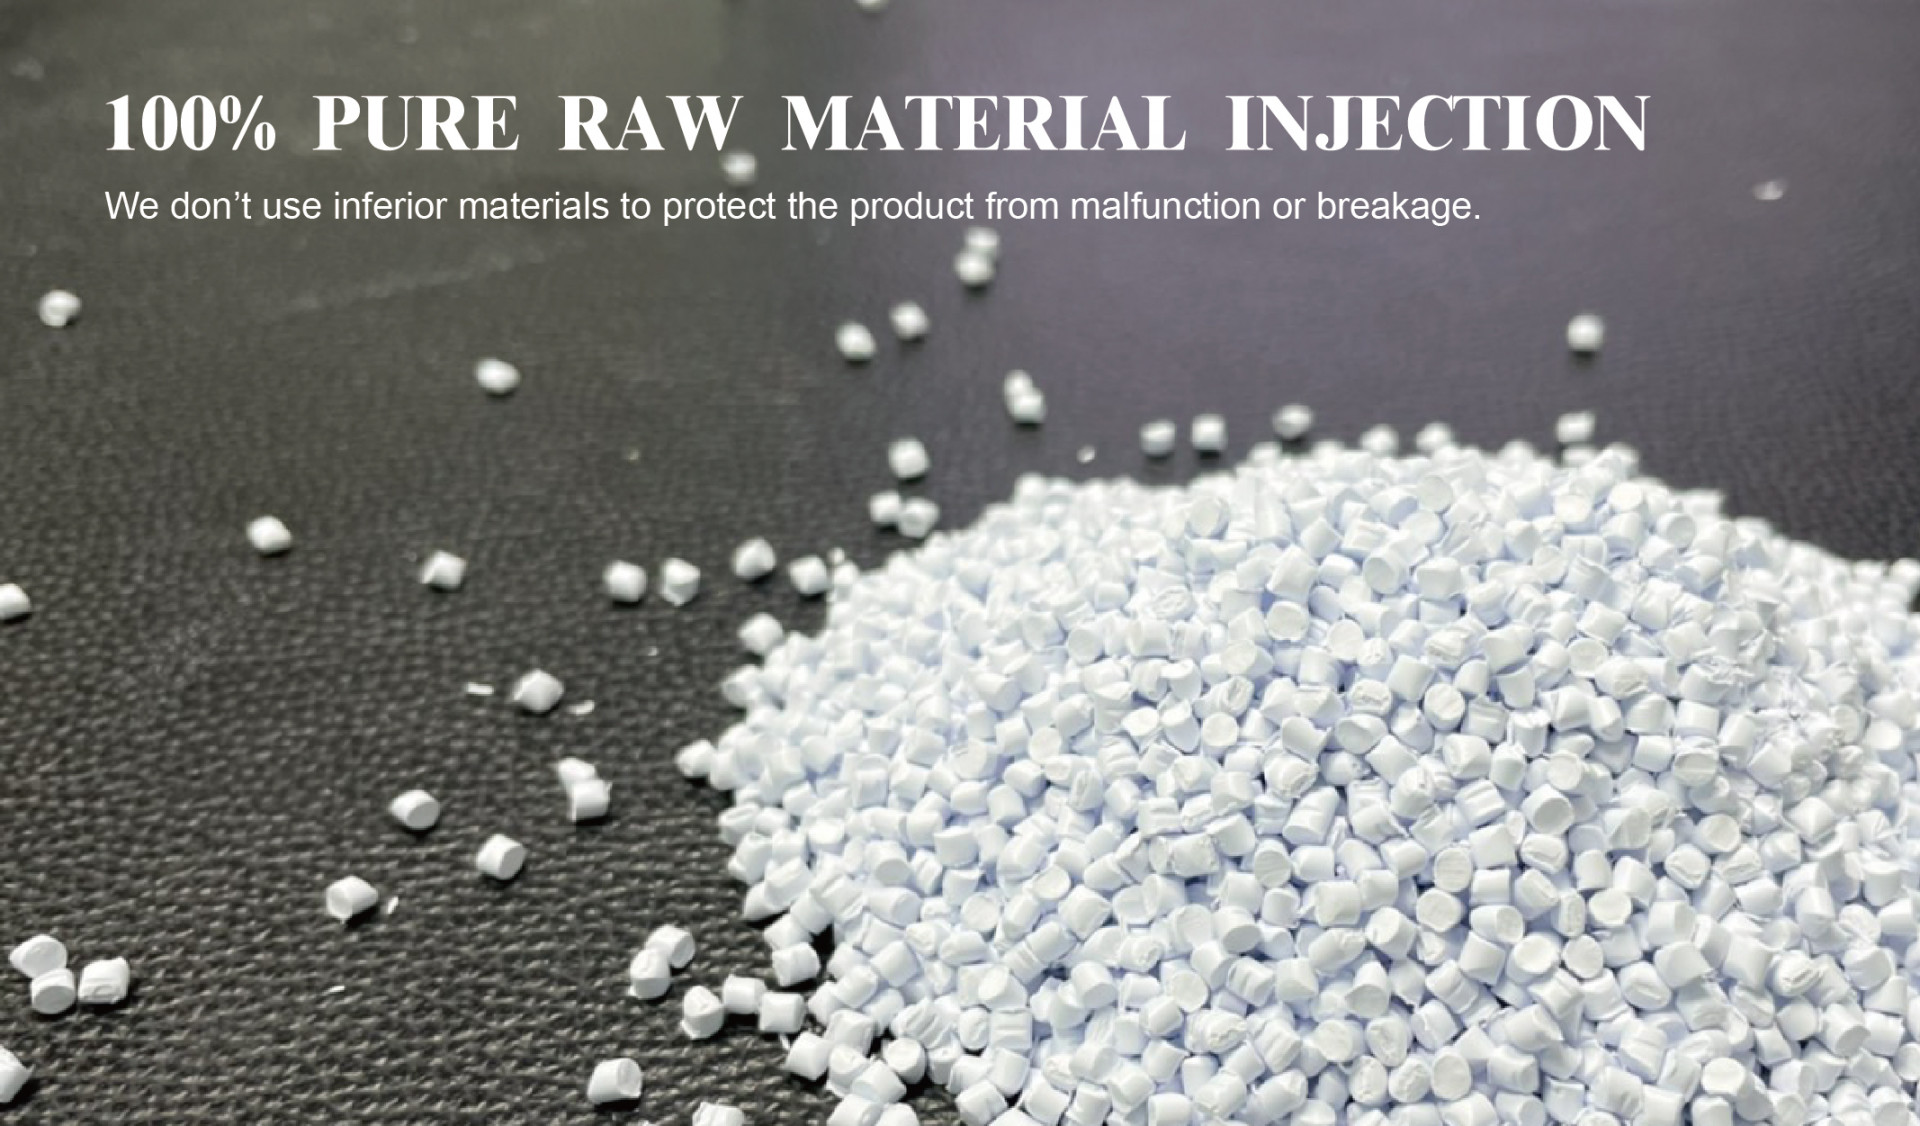 RO SYSTEM 100% PURE RAW MATERIAL INJECTION